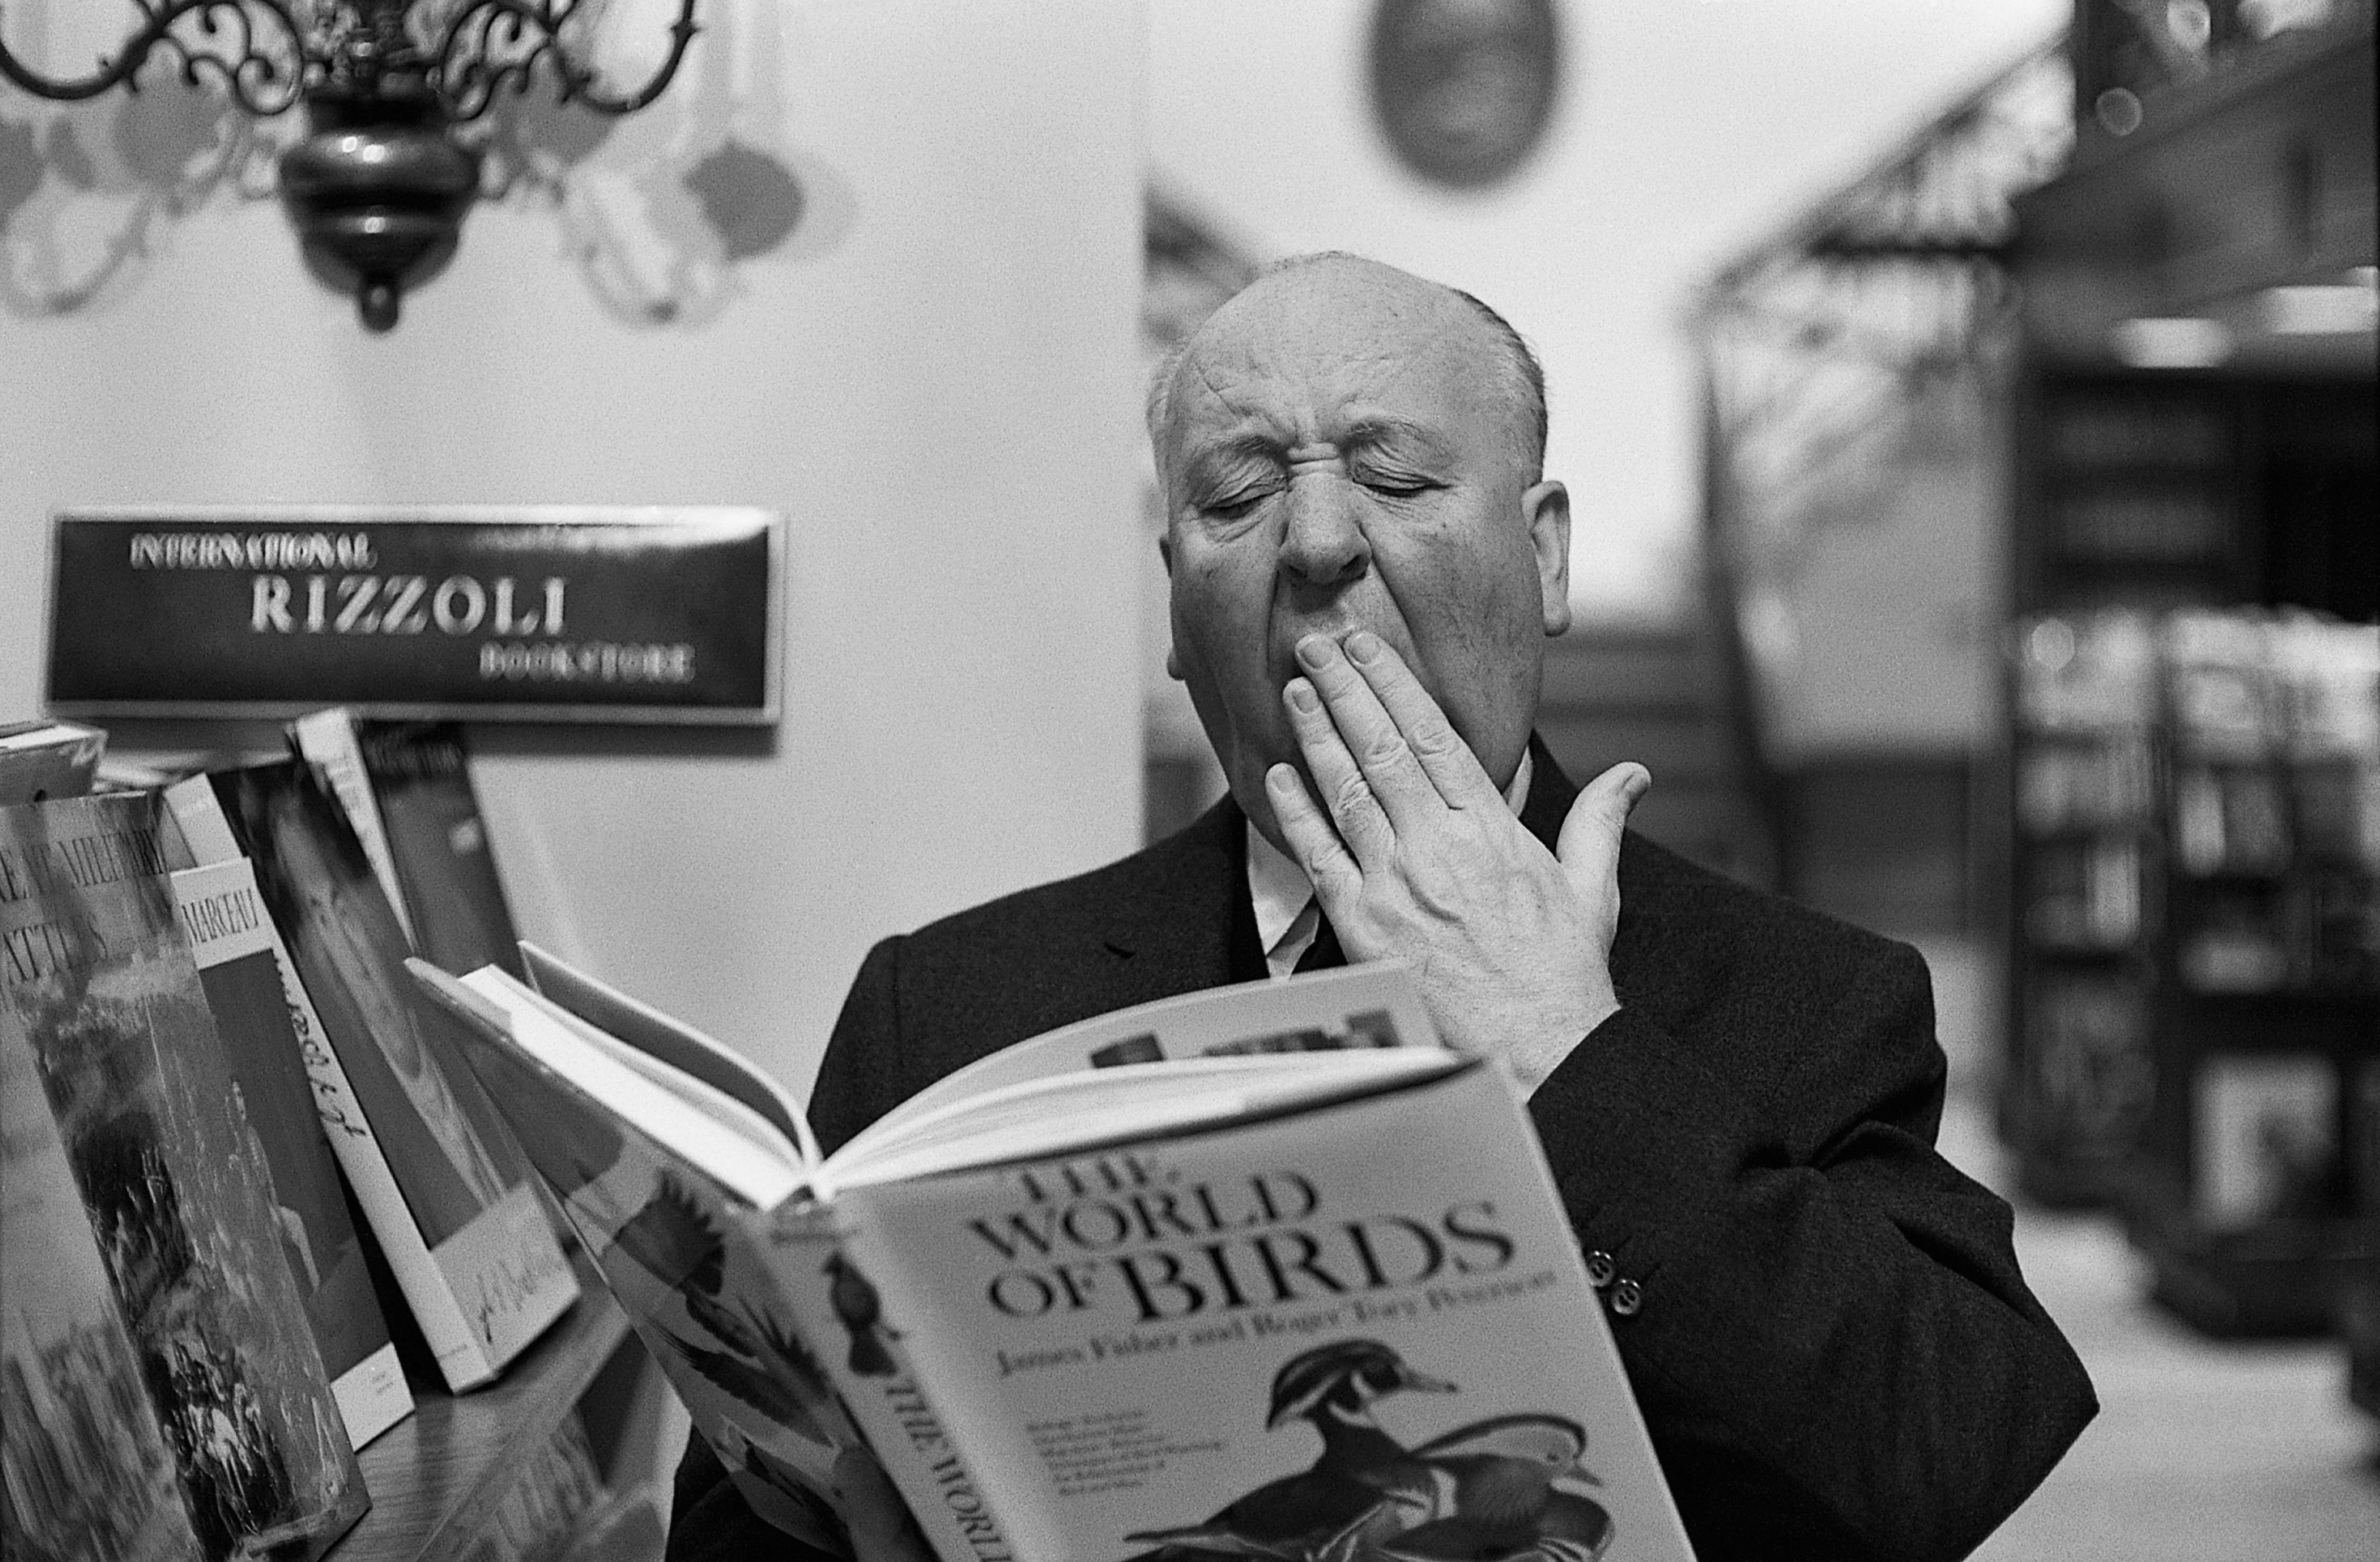 People 4048x2657 men Film directors Alfred Hitchcock monochrome yawning books suits birds reading bookstore humor celebrity deceased